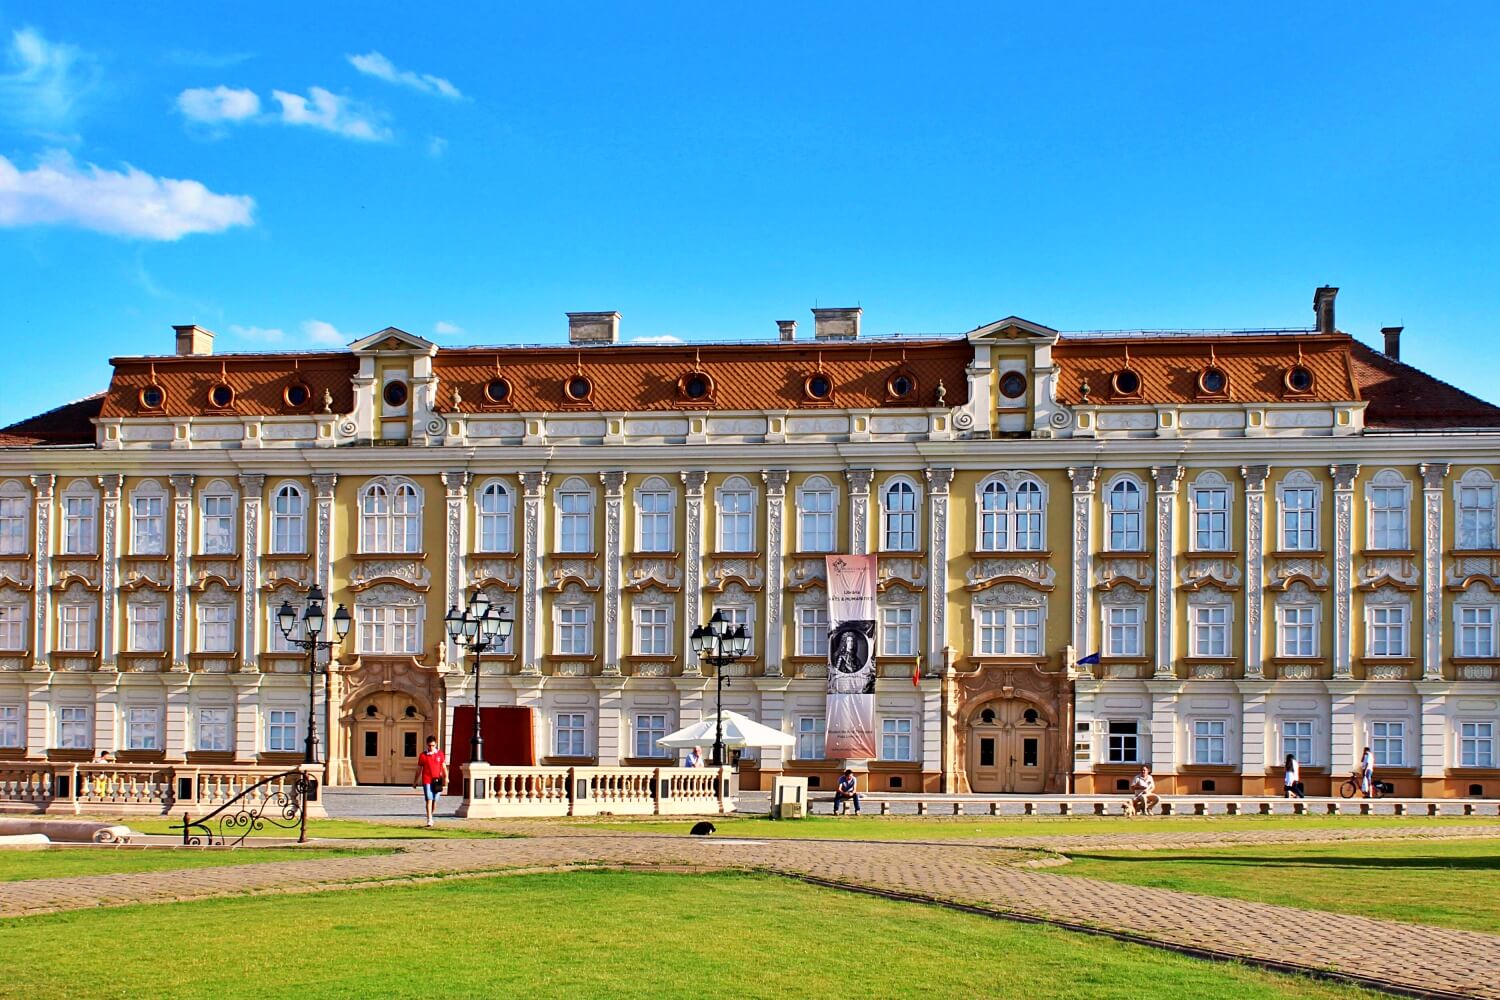 The Baroque Palace